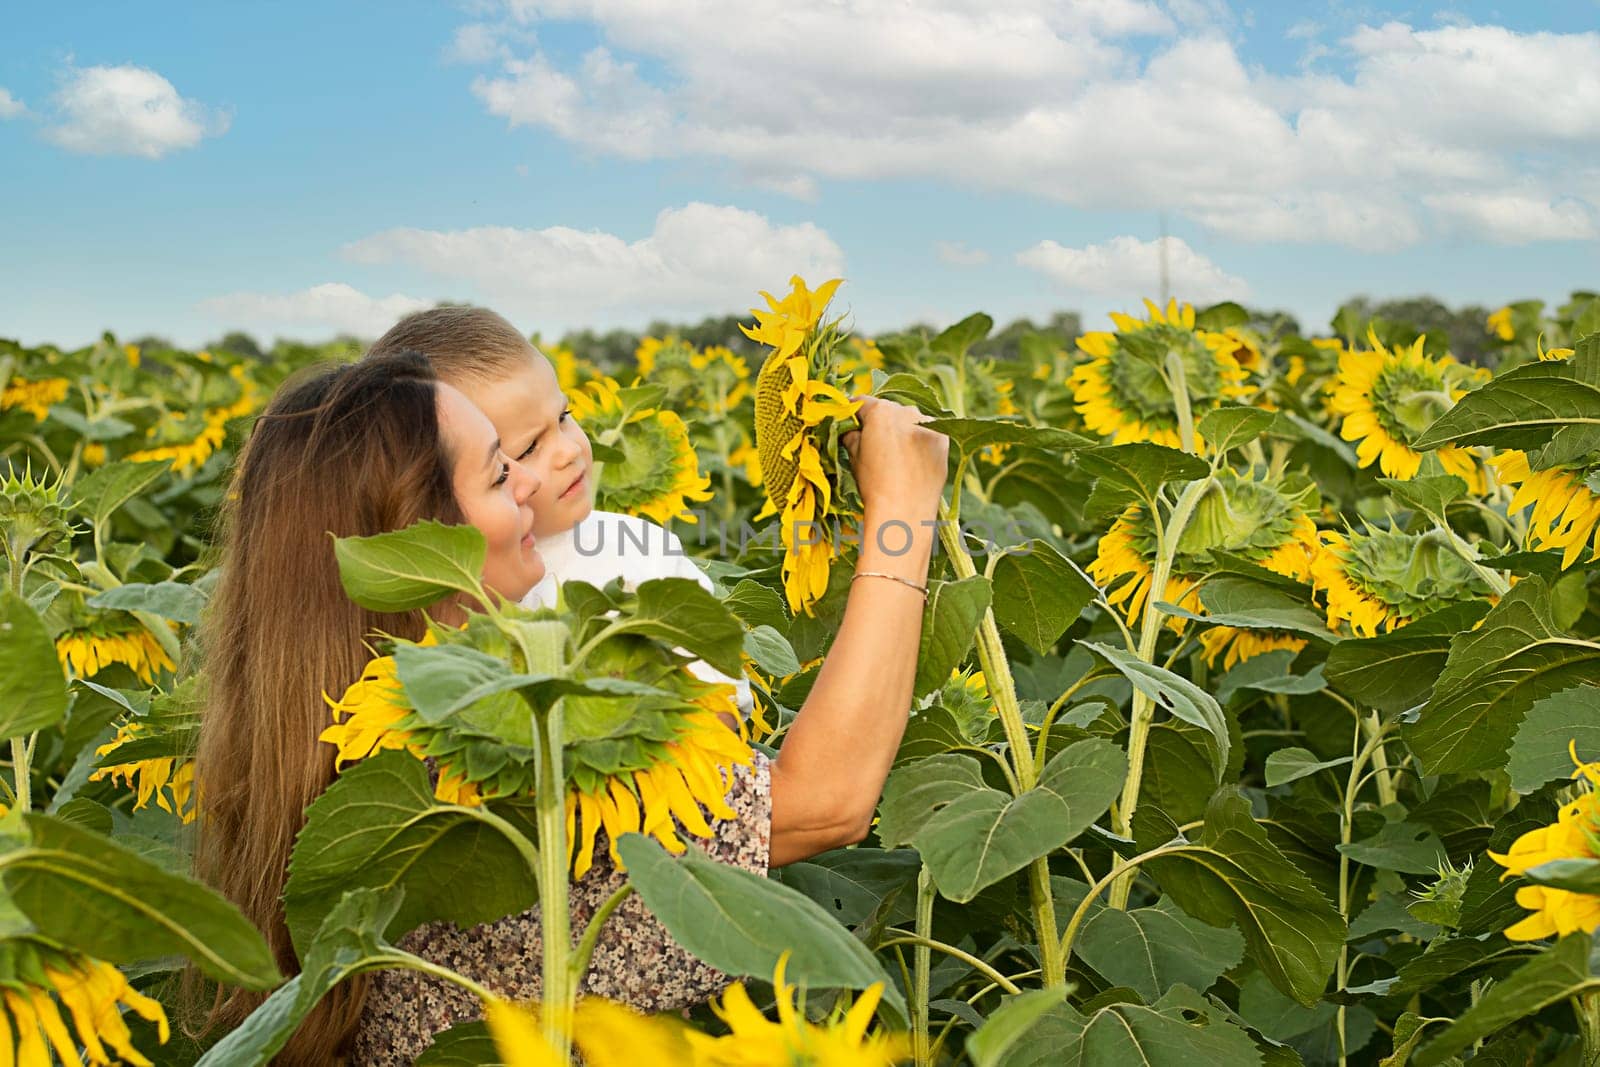 Family concept. A little boy in his mother's arms, gently hugging. Stand in a field with yellow sunflowers on a summer background. blue sky Peace symbol. Symbol of Ukraine.